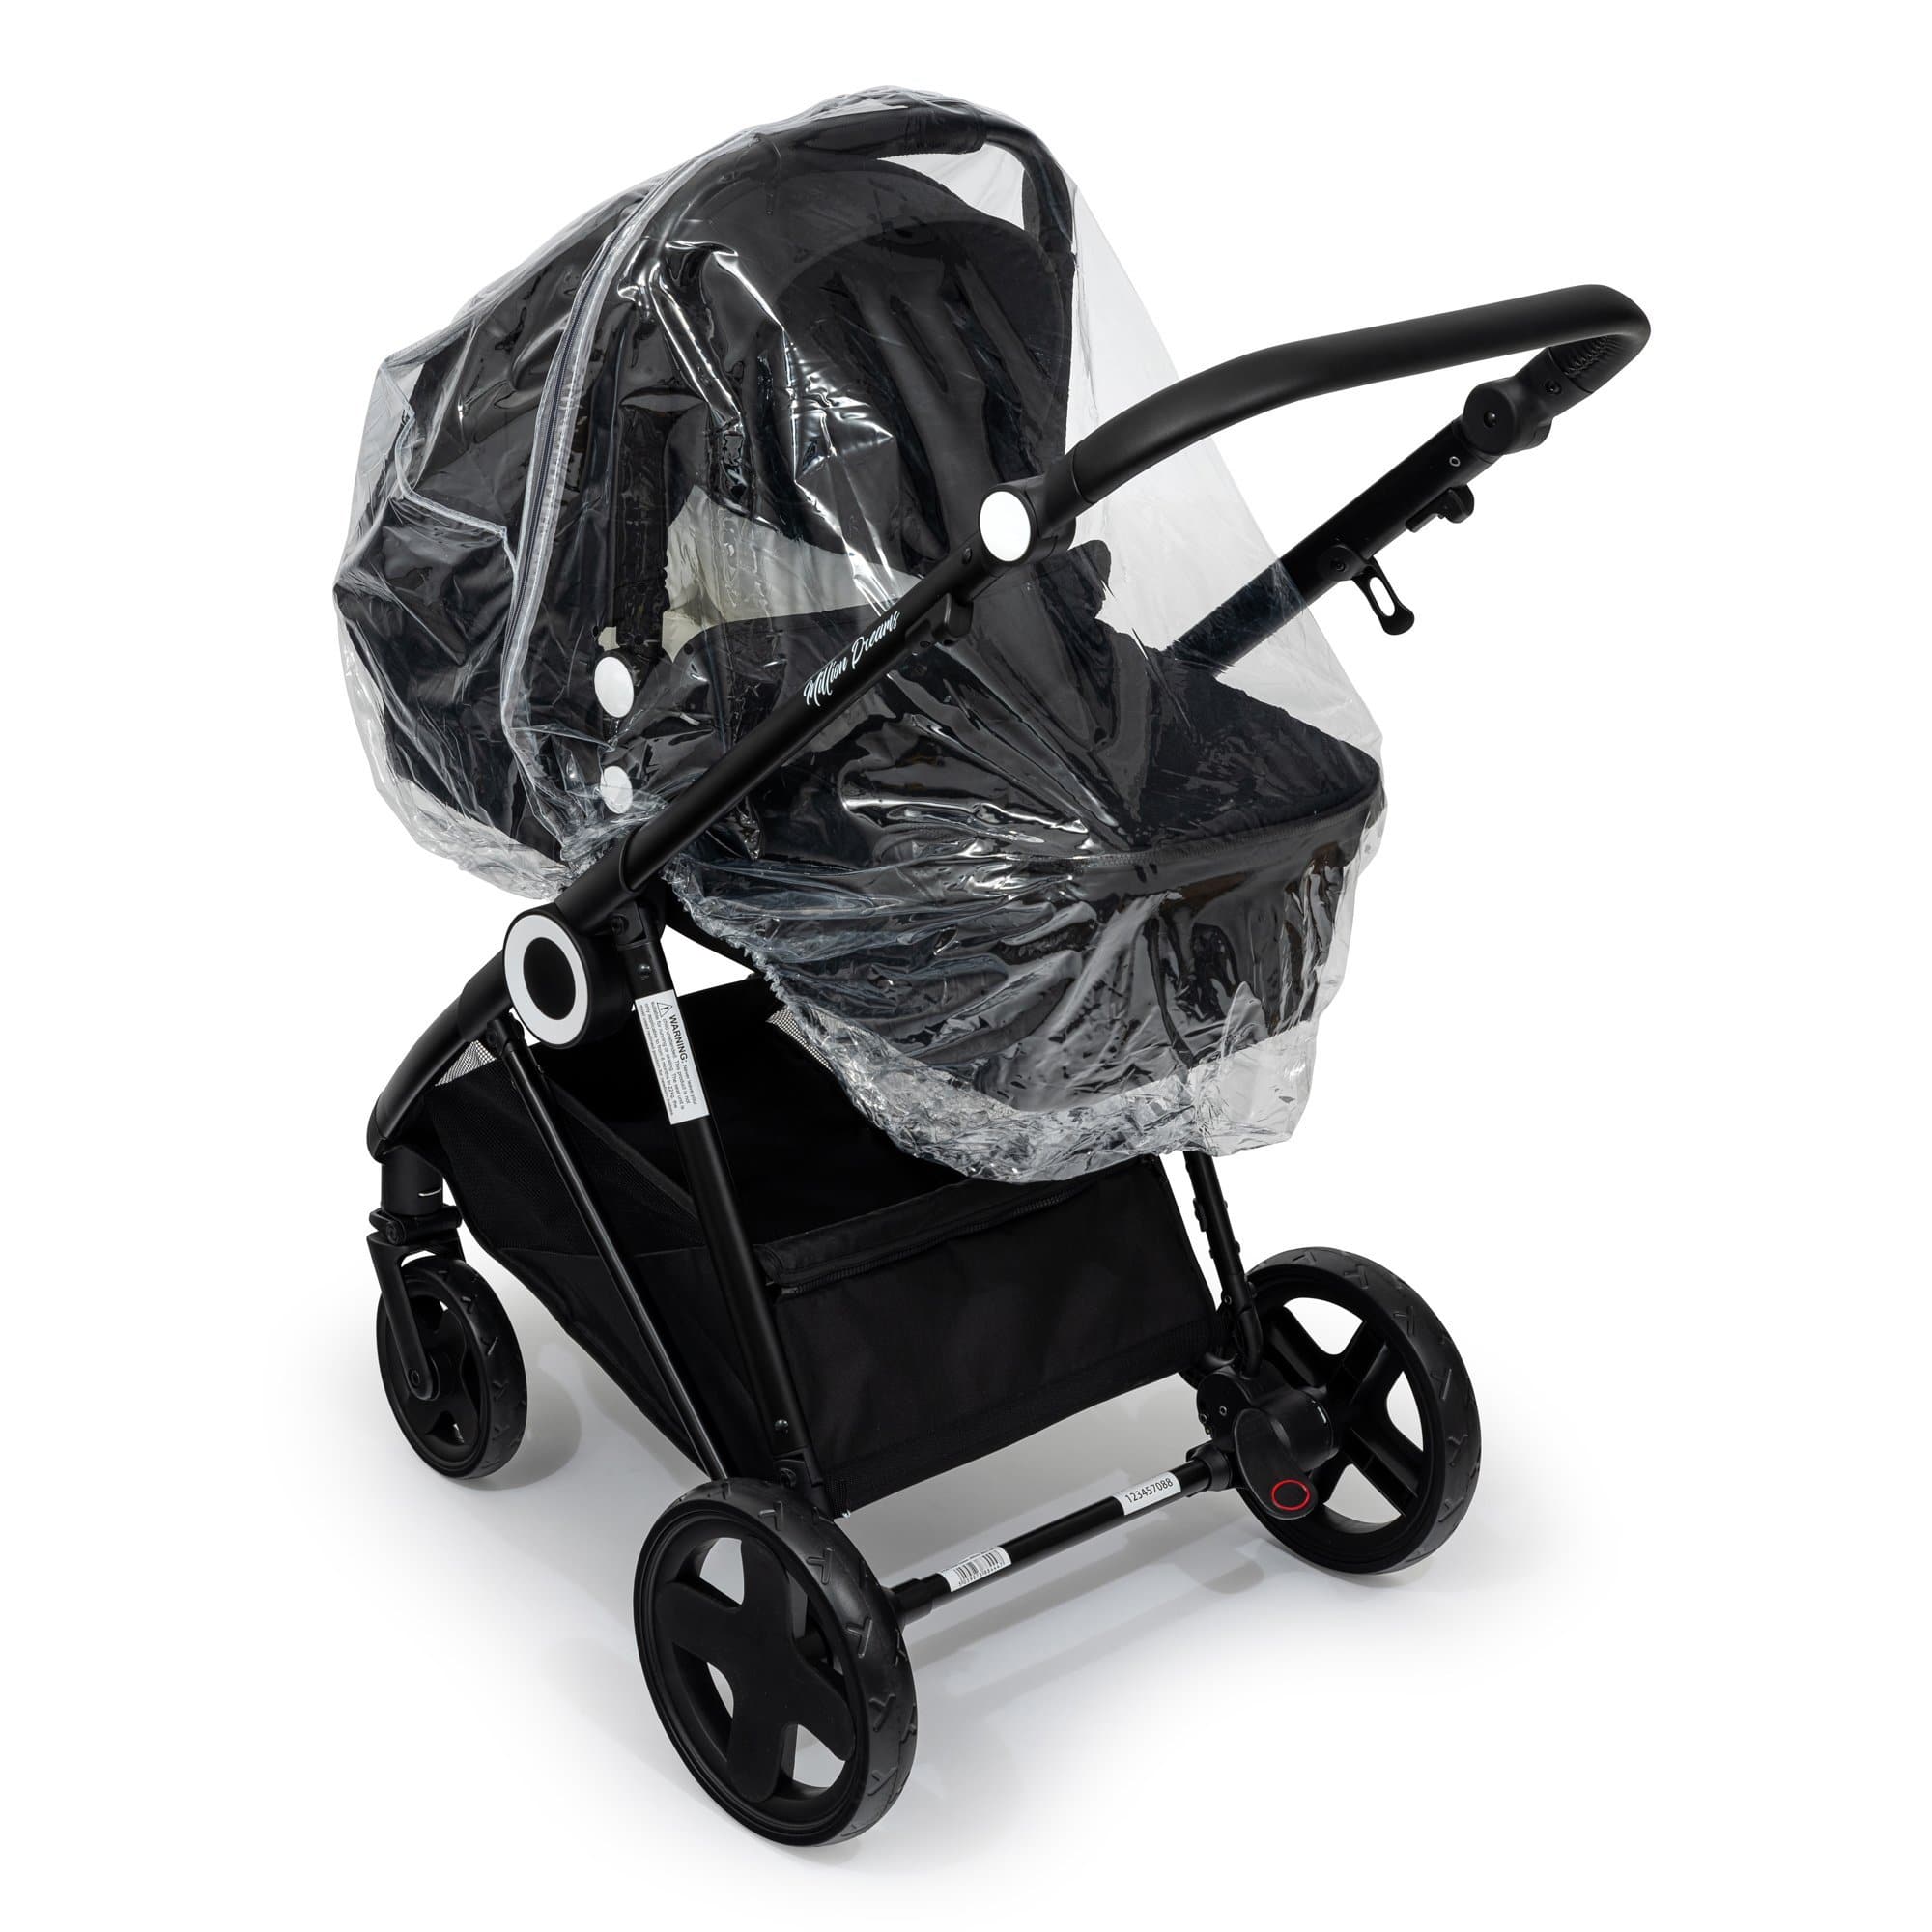 2 in 1 Rain Cover Compatible with Britax - Fits All Models - For Your Little One